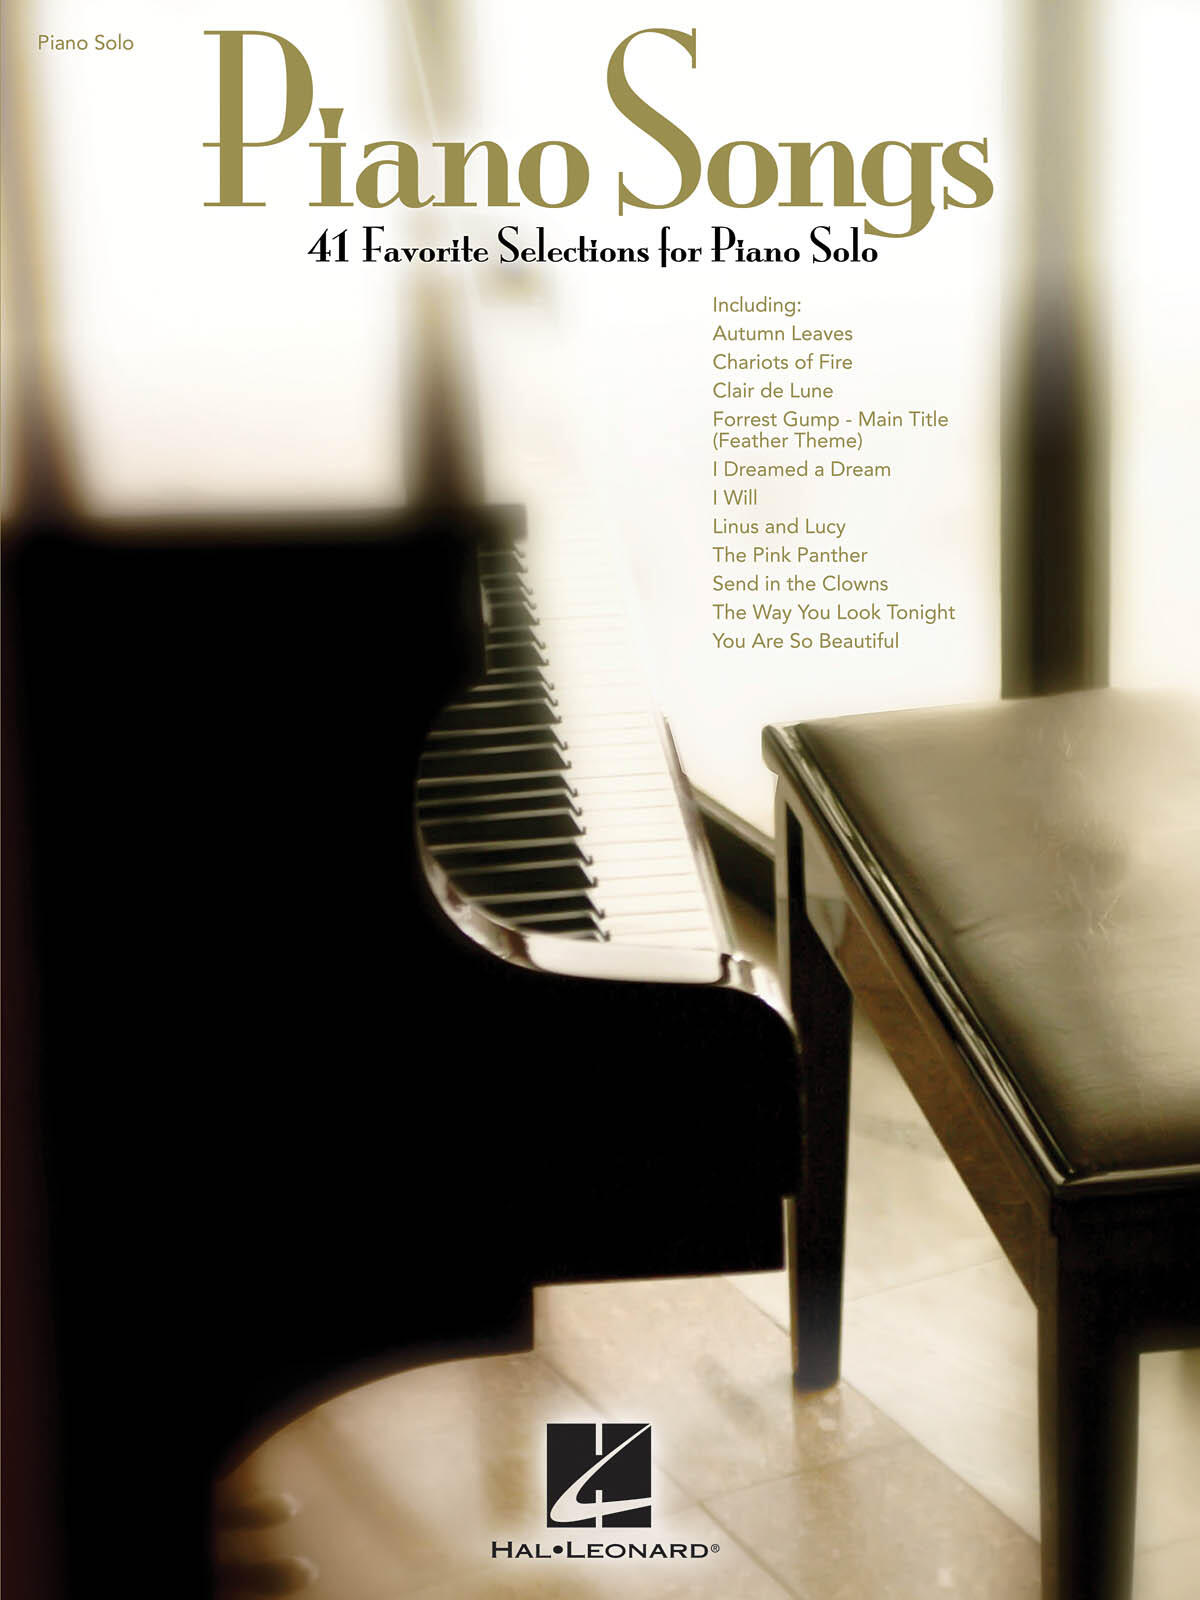 Piano Songs 41 Favorite Selections for Piano Solo : photo 1